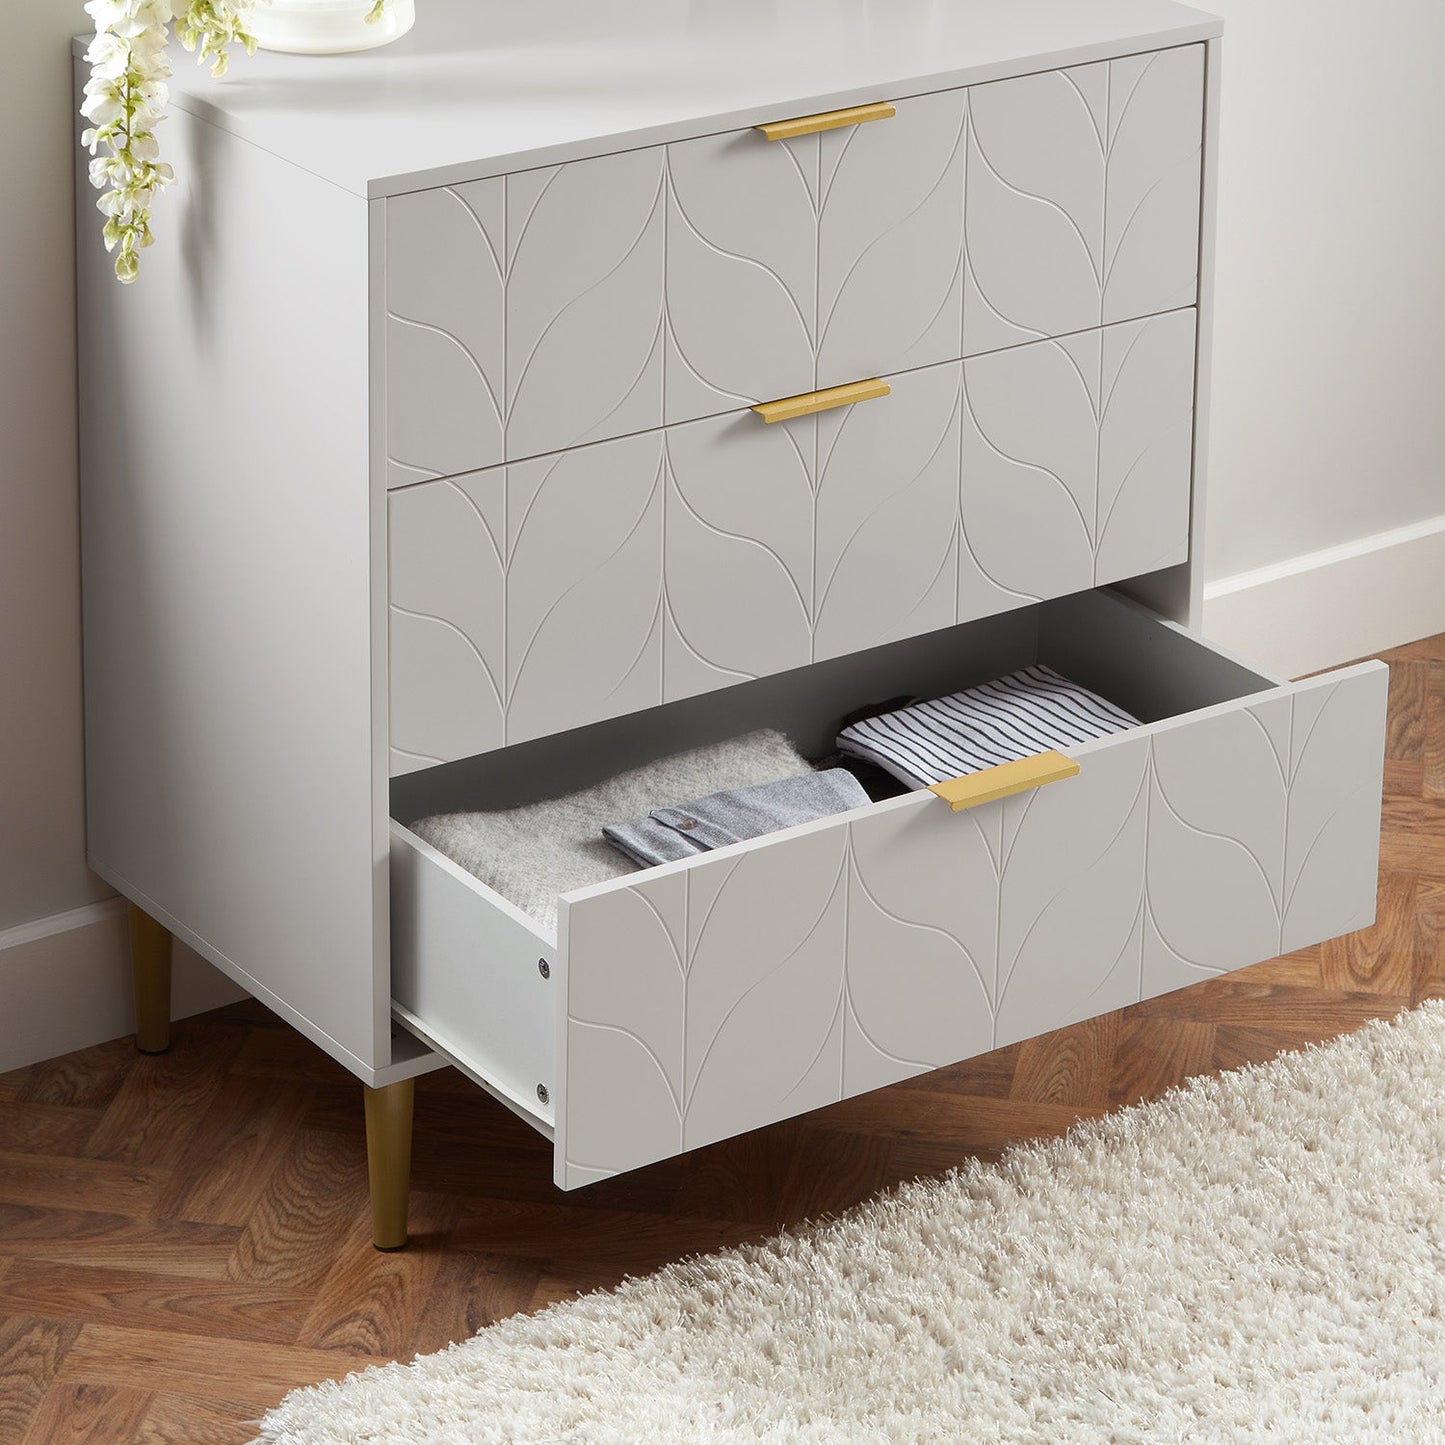 Gloria wardrobe and drawers set -3 drawer chest of drawers - grey - Laura James